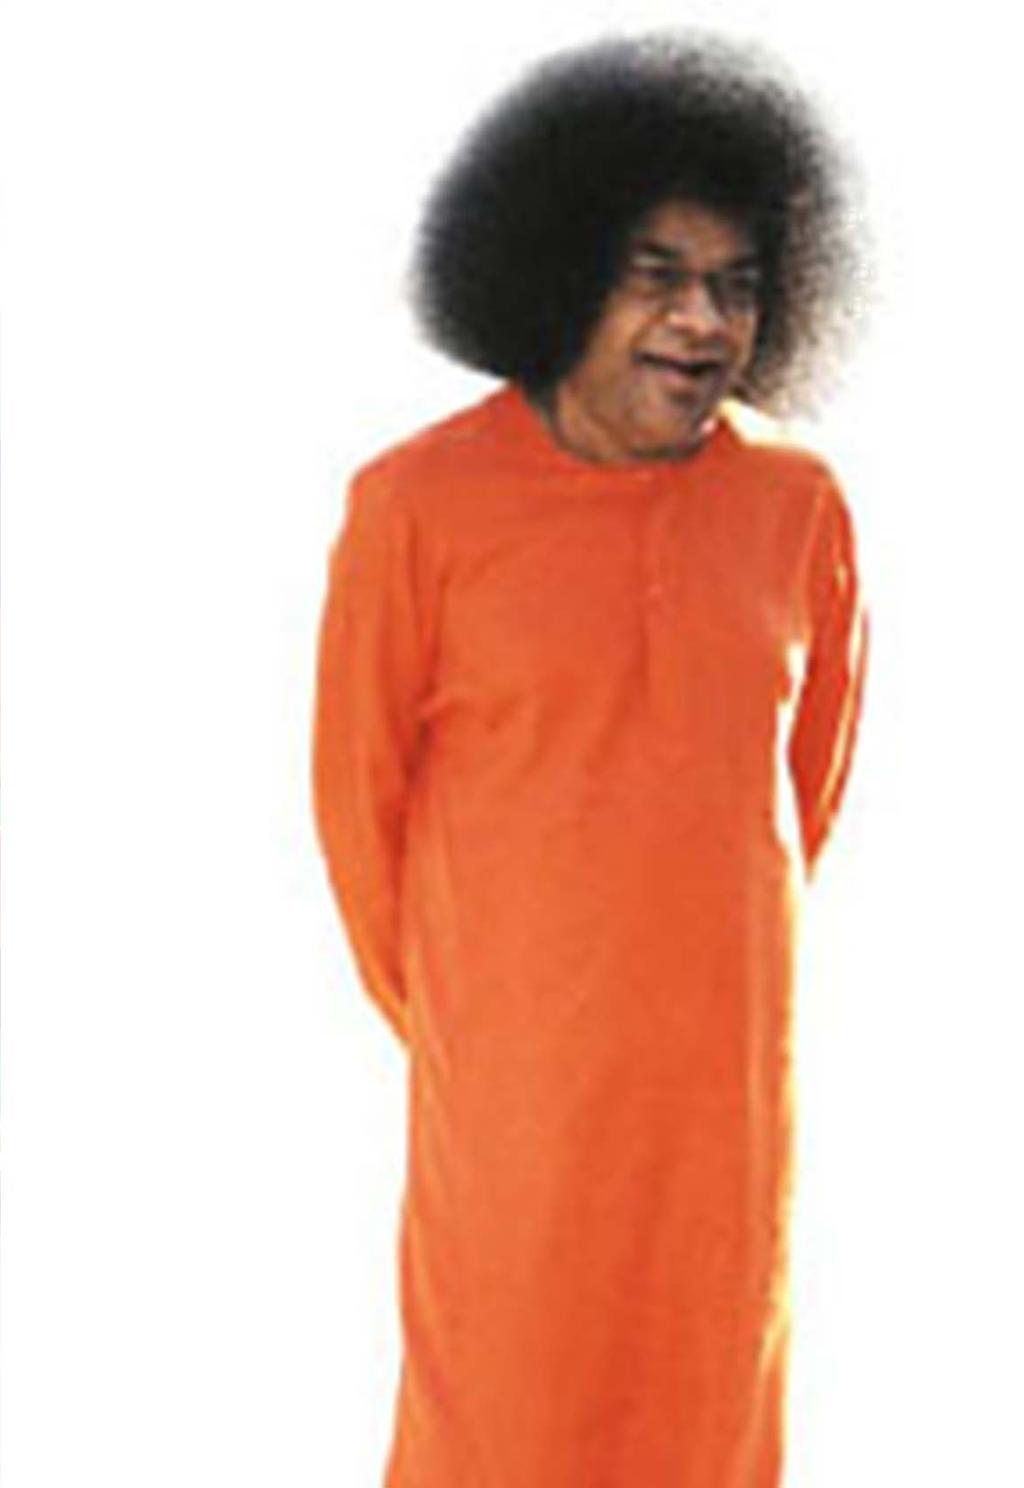 The guru said, Yes, I can do that. I can grant a boon, but I will have to take one life in order to restore another.